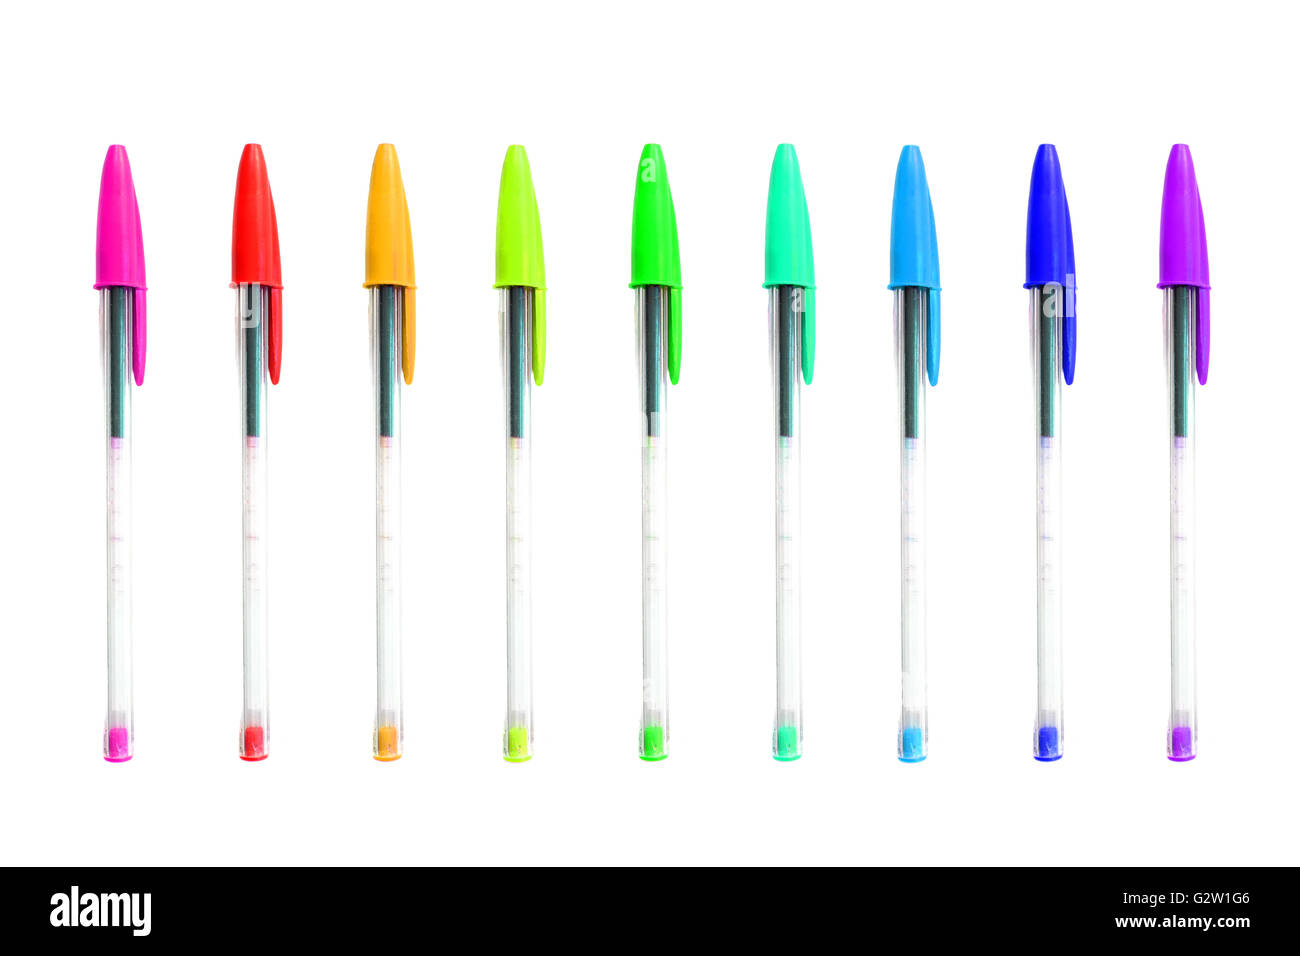 Biro pens in a rainbow of colours photographed against a white background. Stock Photo